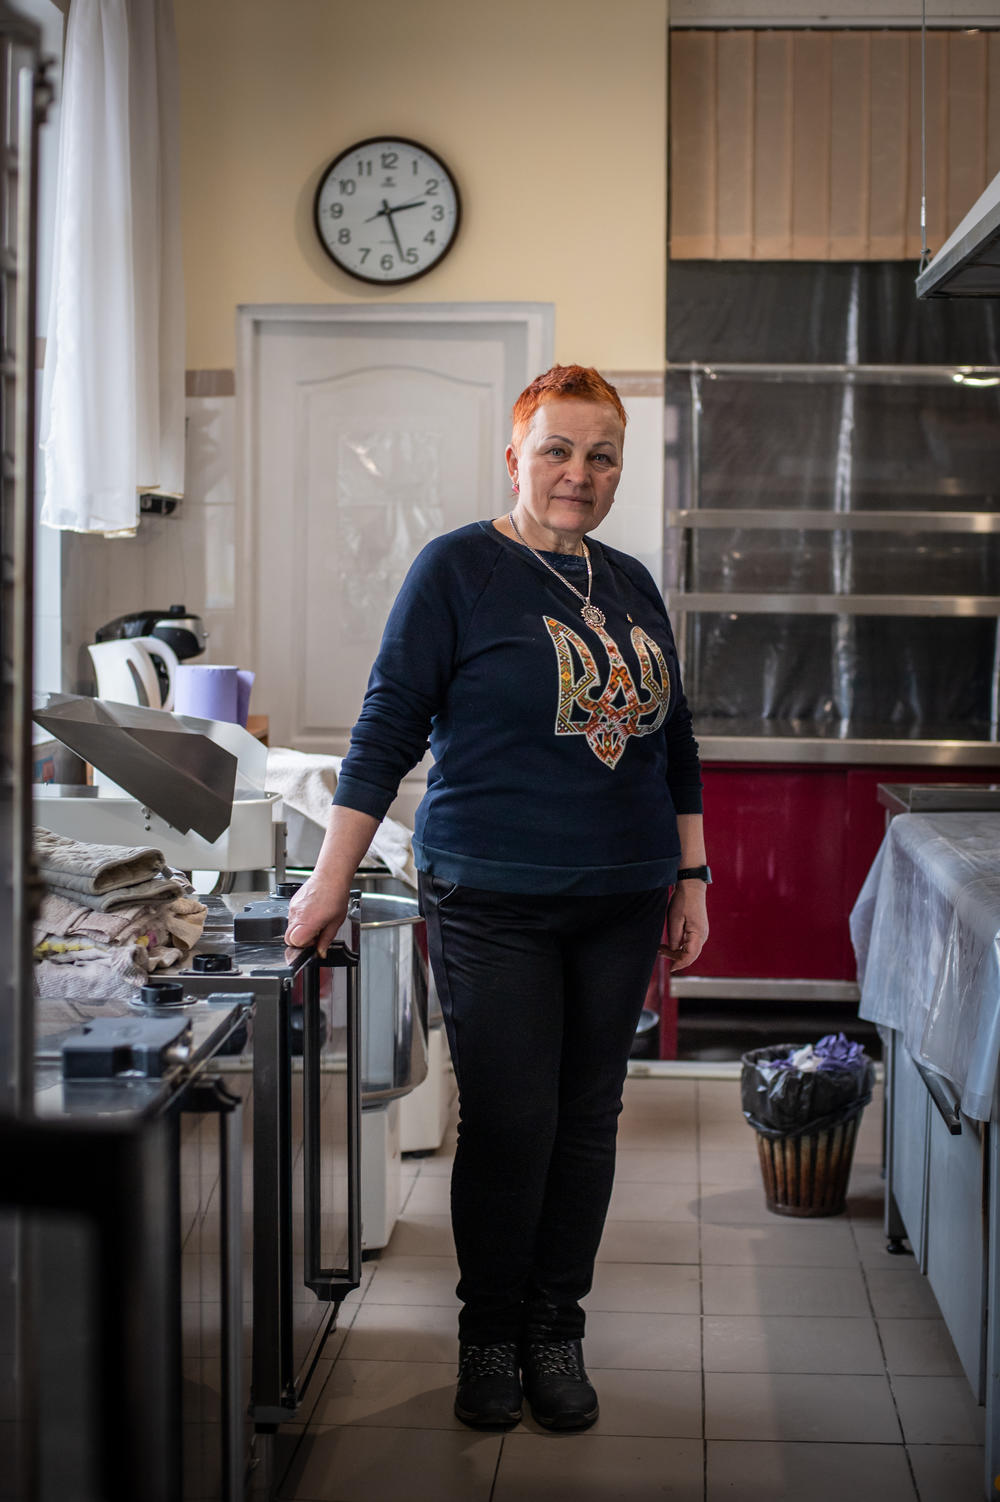 Oksana Pohomii, a 59-year-old accountant and city council member who had spied on the Russian forces during their occupation of Kherson, poses for a portrait in the bakery where she now bakes and distributes bread to local residents.